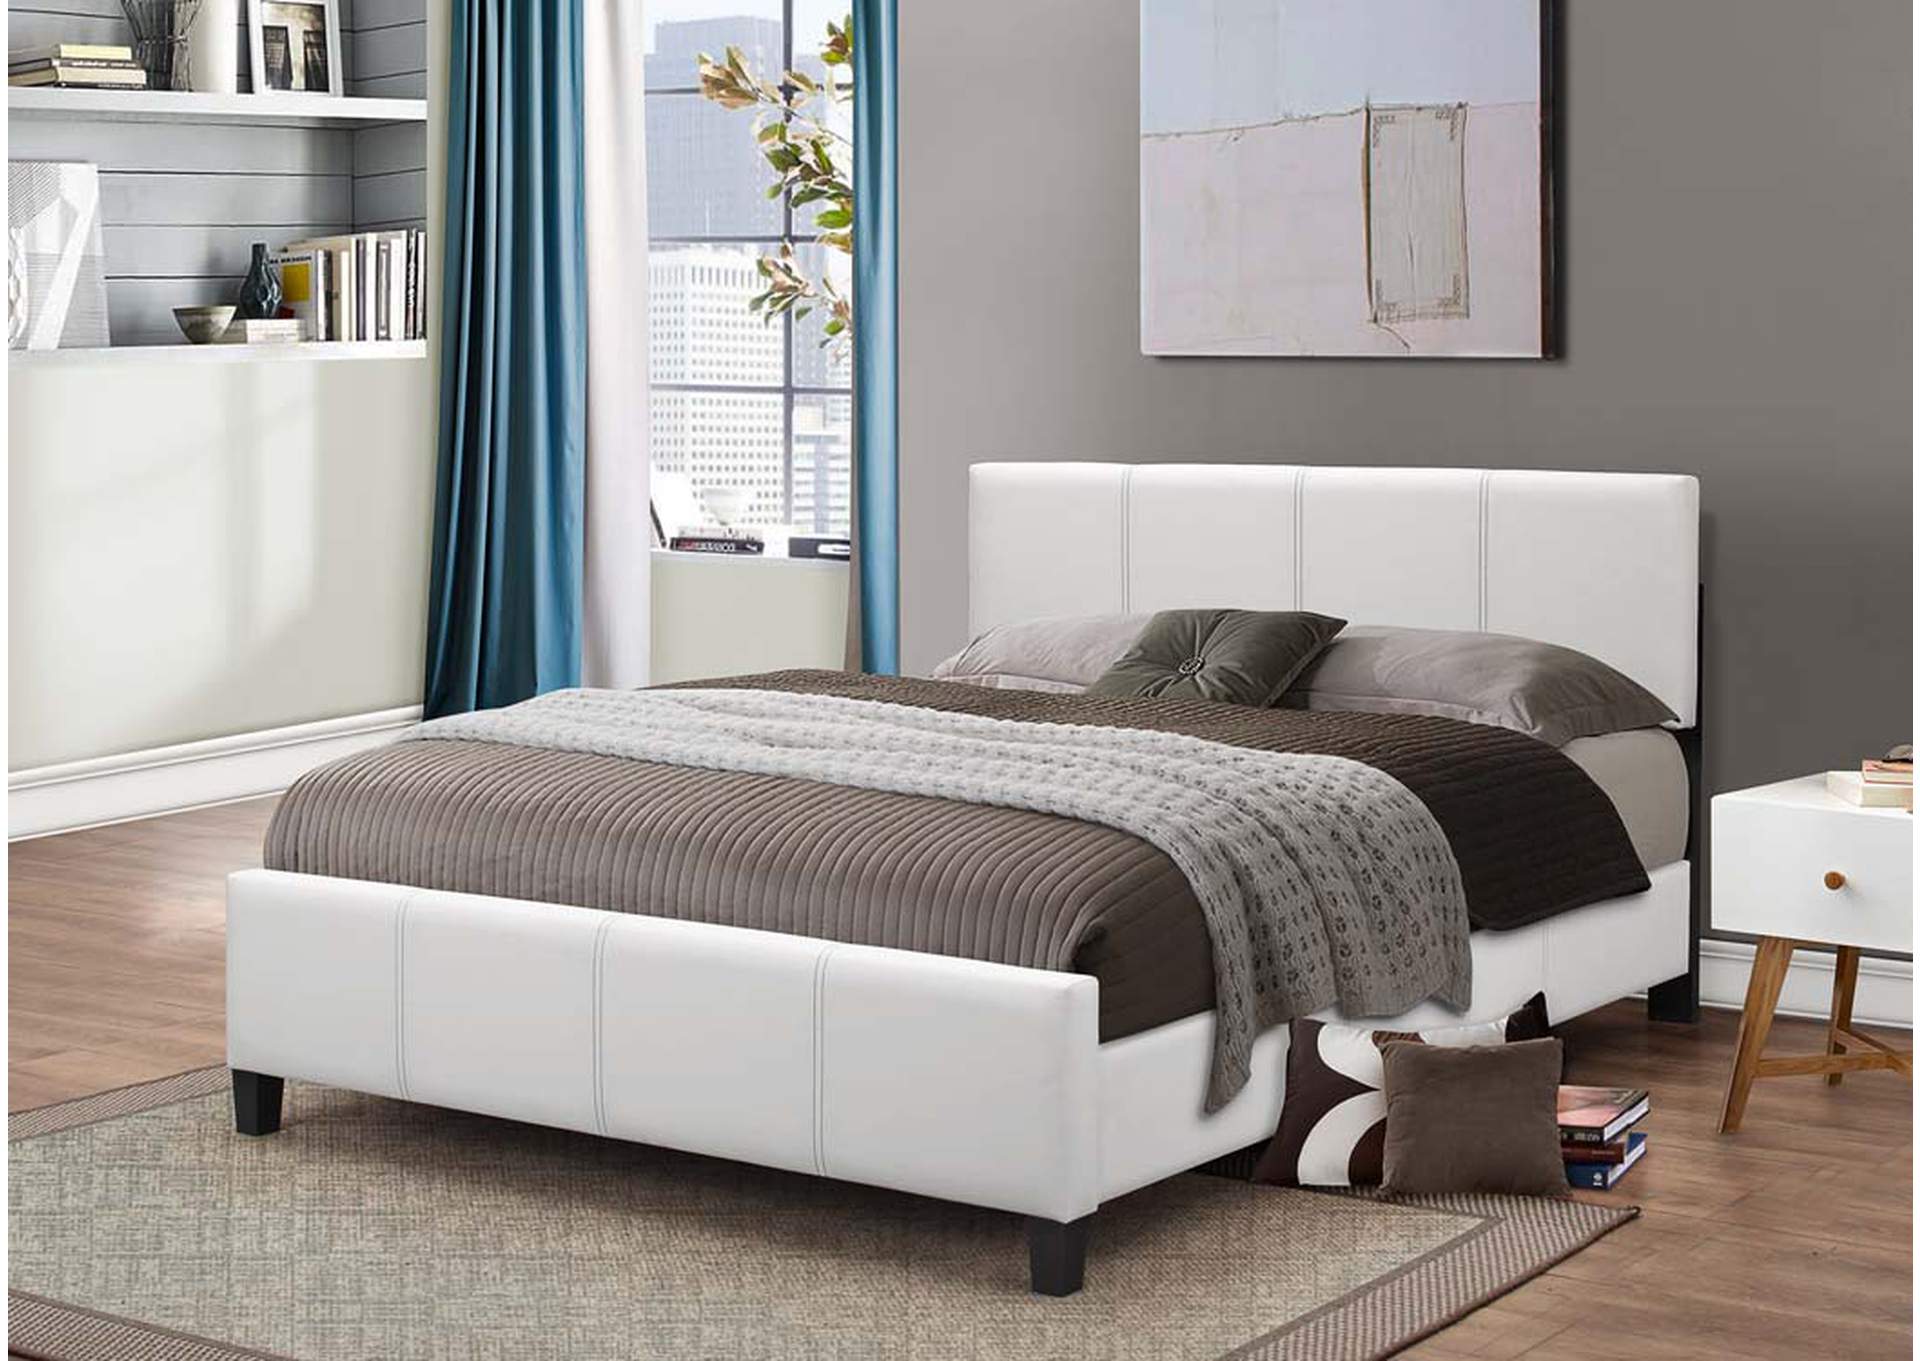 Jazzlyn White Upholstered PU Twin Bed,Global Trading